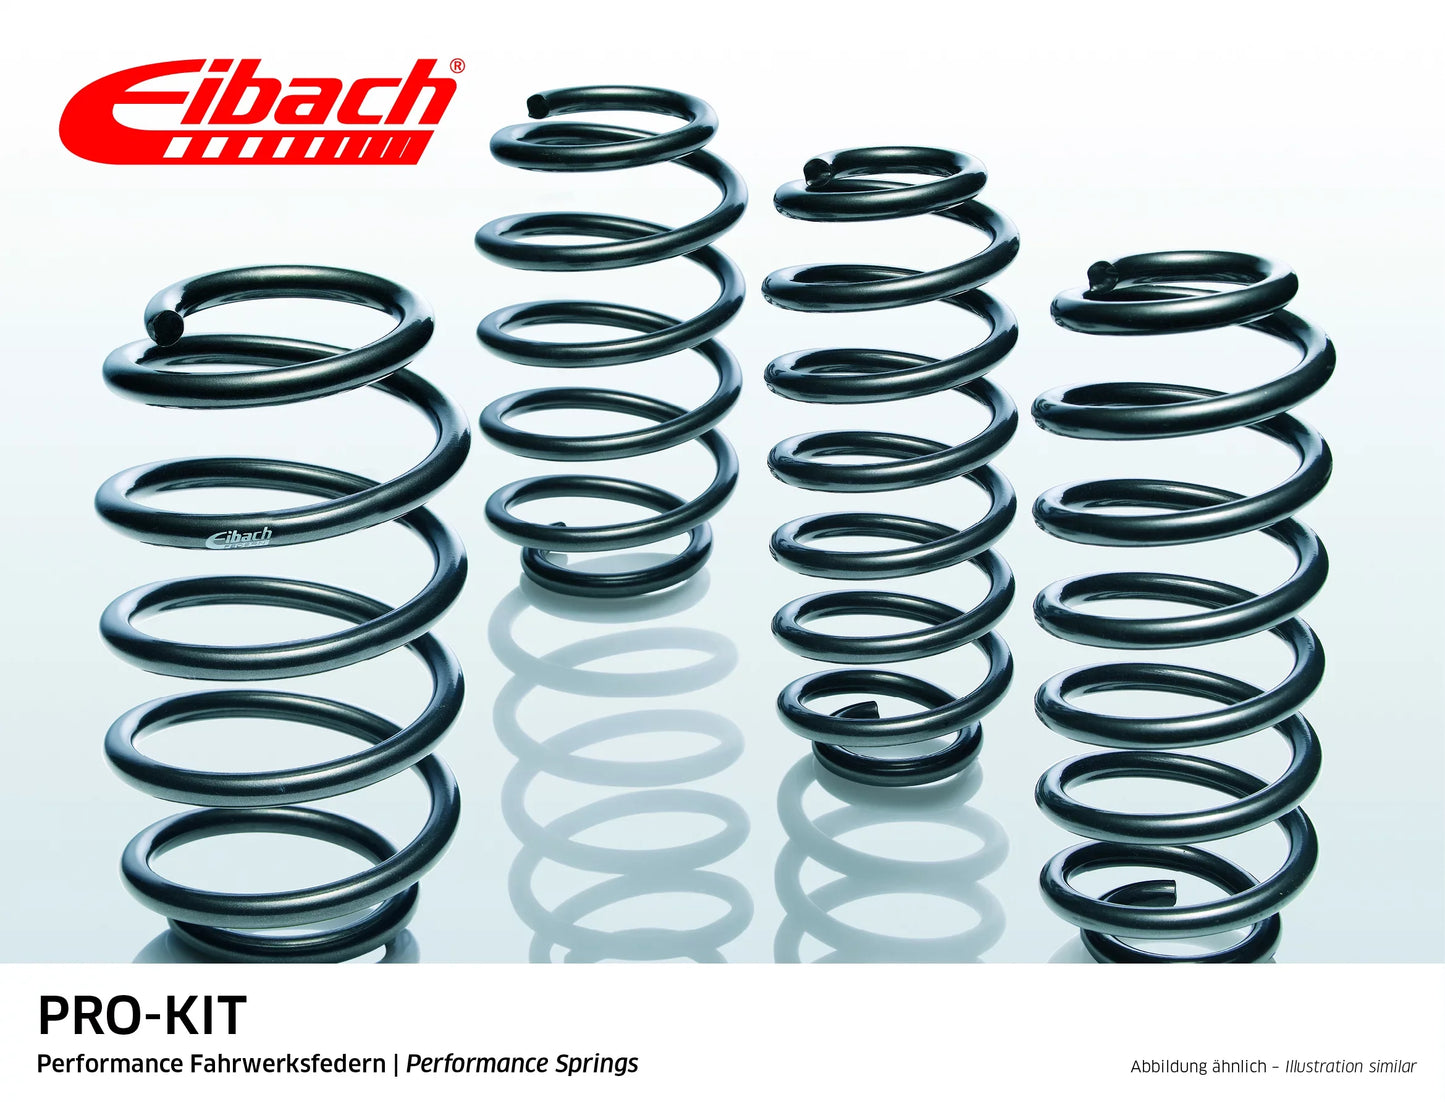 Eibach Pro-Kit Lowering Springs (E10-26-004-01-22) at £313.38